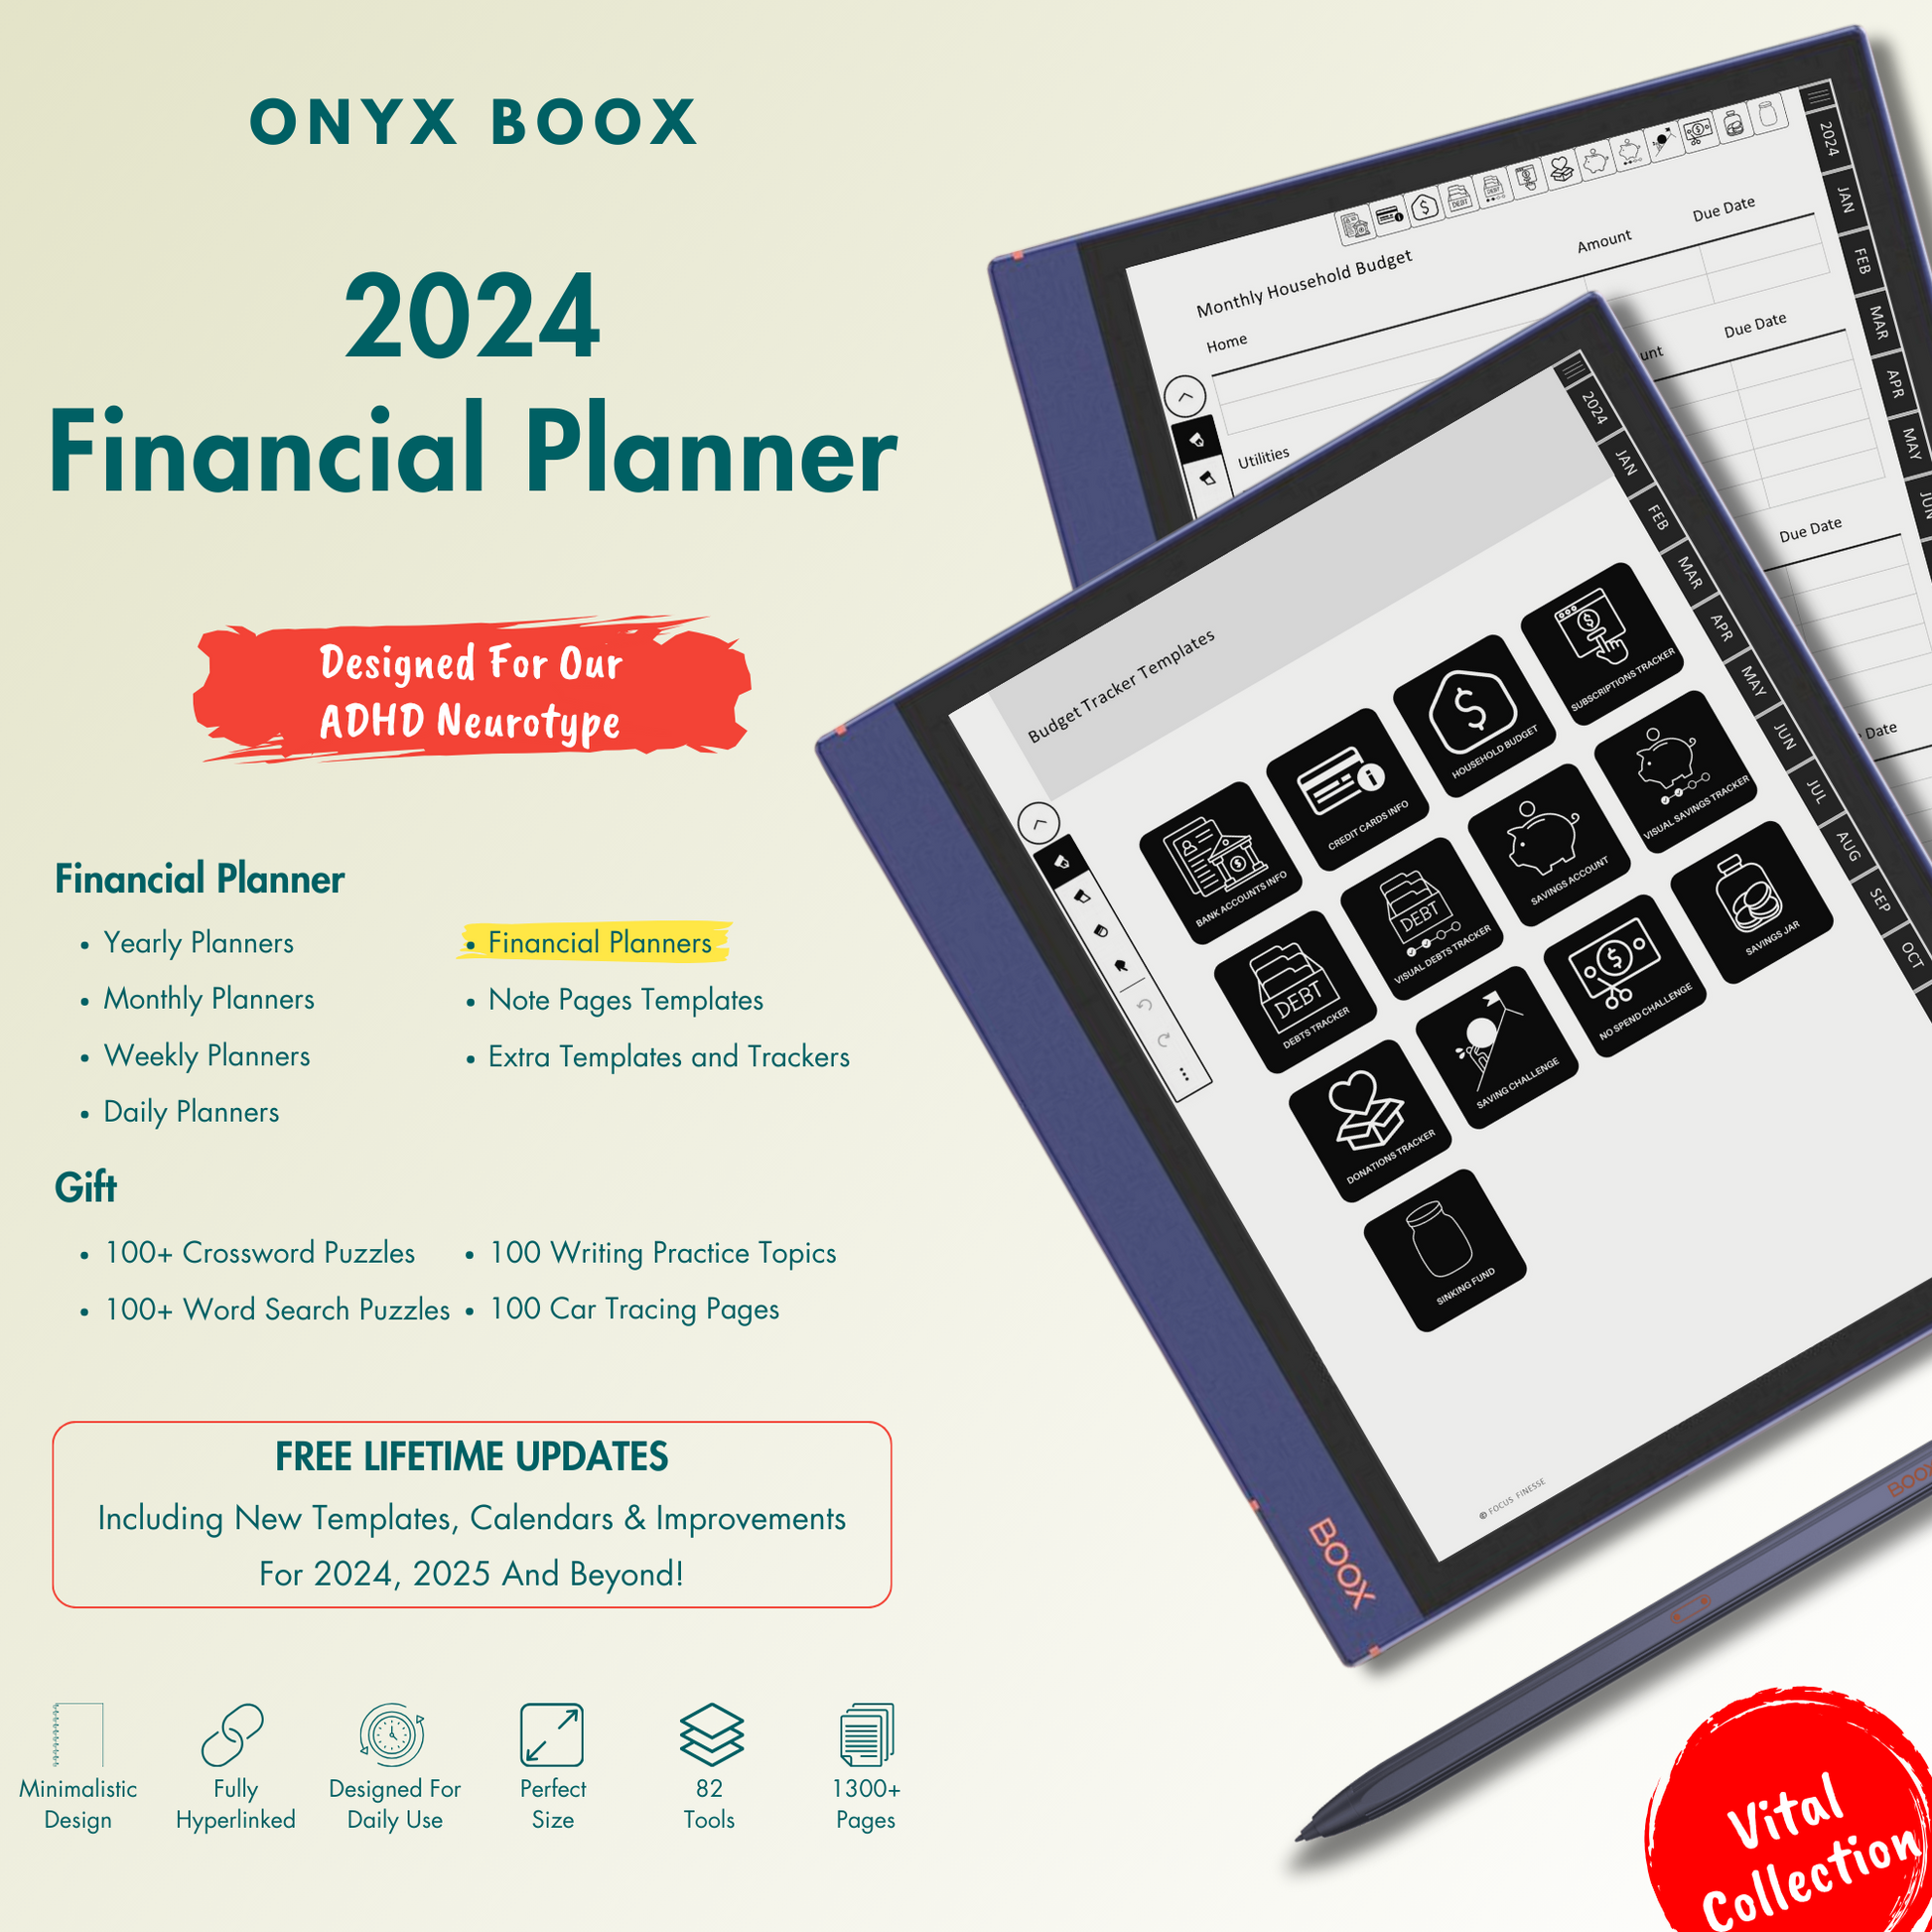 Financial Planner 2024 for Onyx Boox.